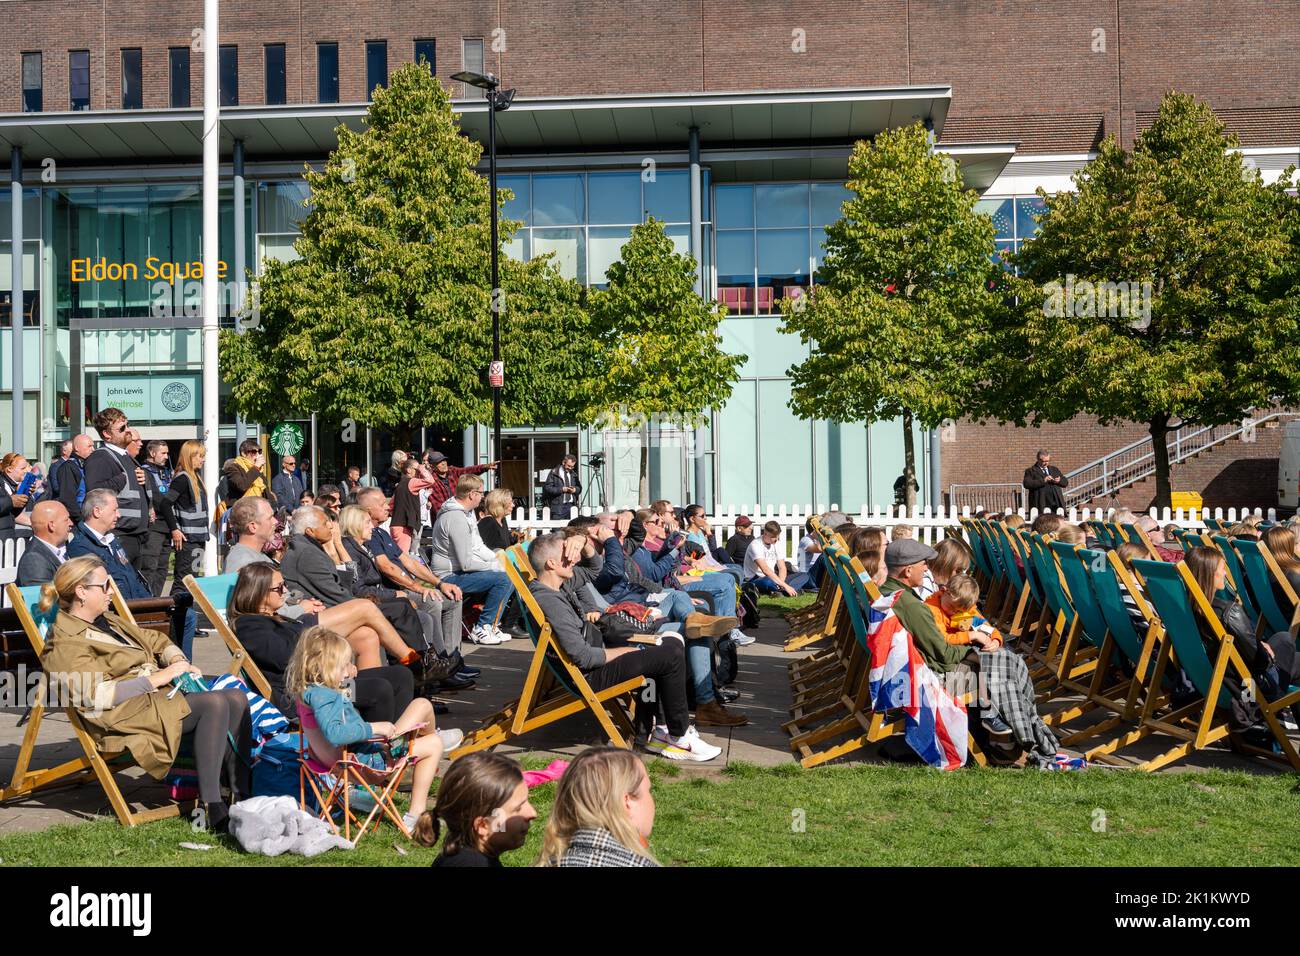 Newcastle upon Tyne, UK. 19th September 2022. People gather to watch the funeral of Queen Elizabeth II on a big screen in Old Eldon Square. Credit: Hazel Plater/Alamy Live News Stock Photo